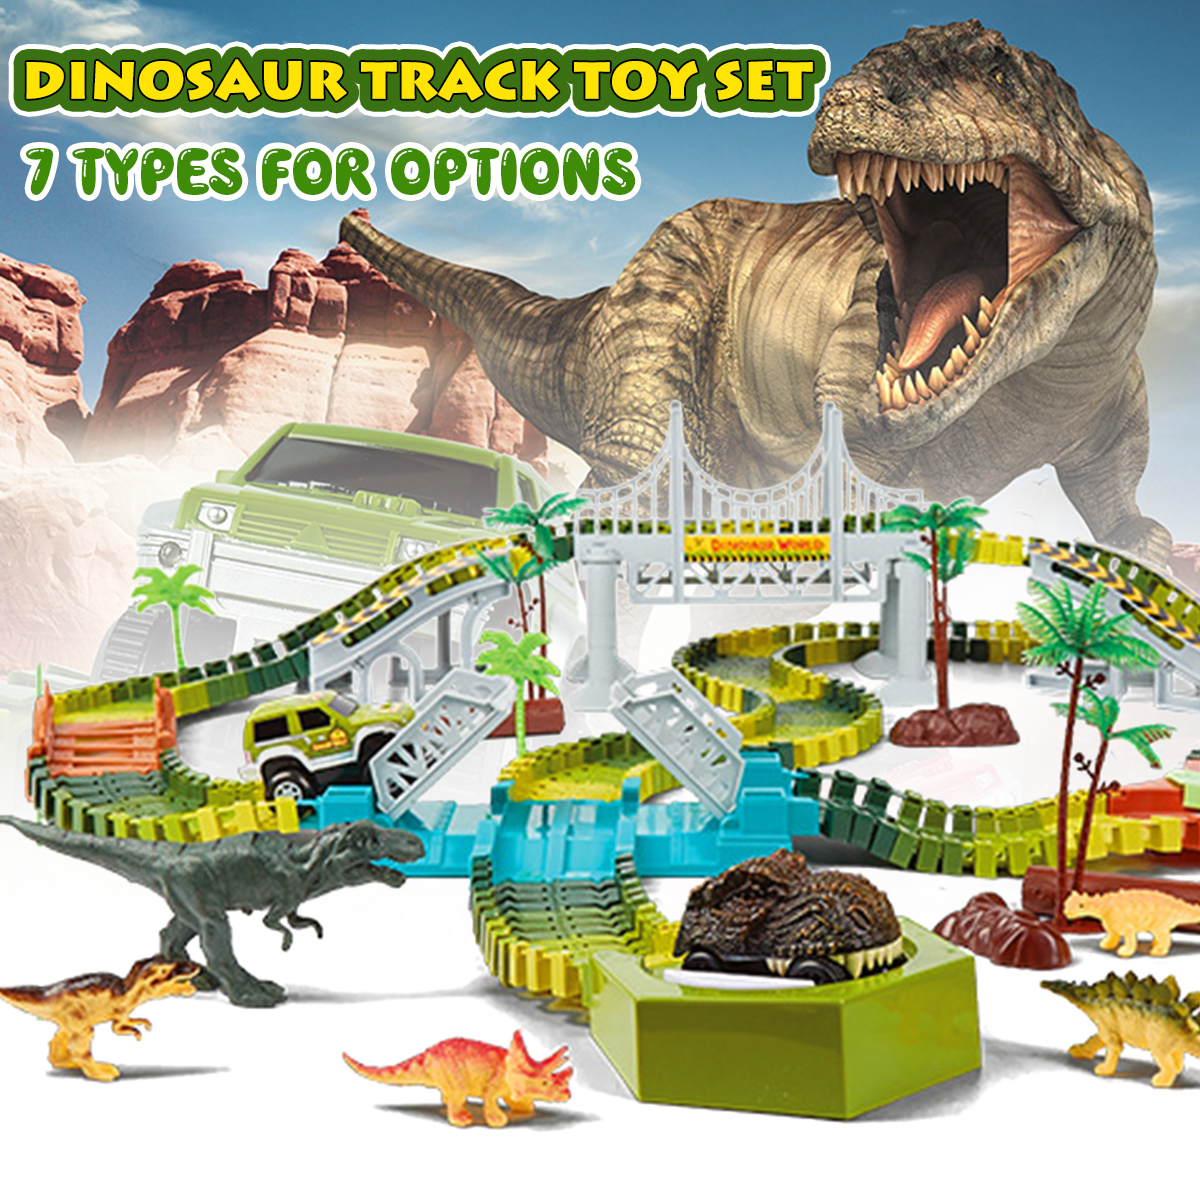 Dinosaur-World-Flexible-Racing-Car-Track-Toys-Construction-Play-Game-Educational-Set-Toy-for-Kids-Gi-1693947-1